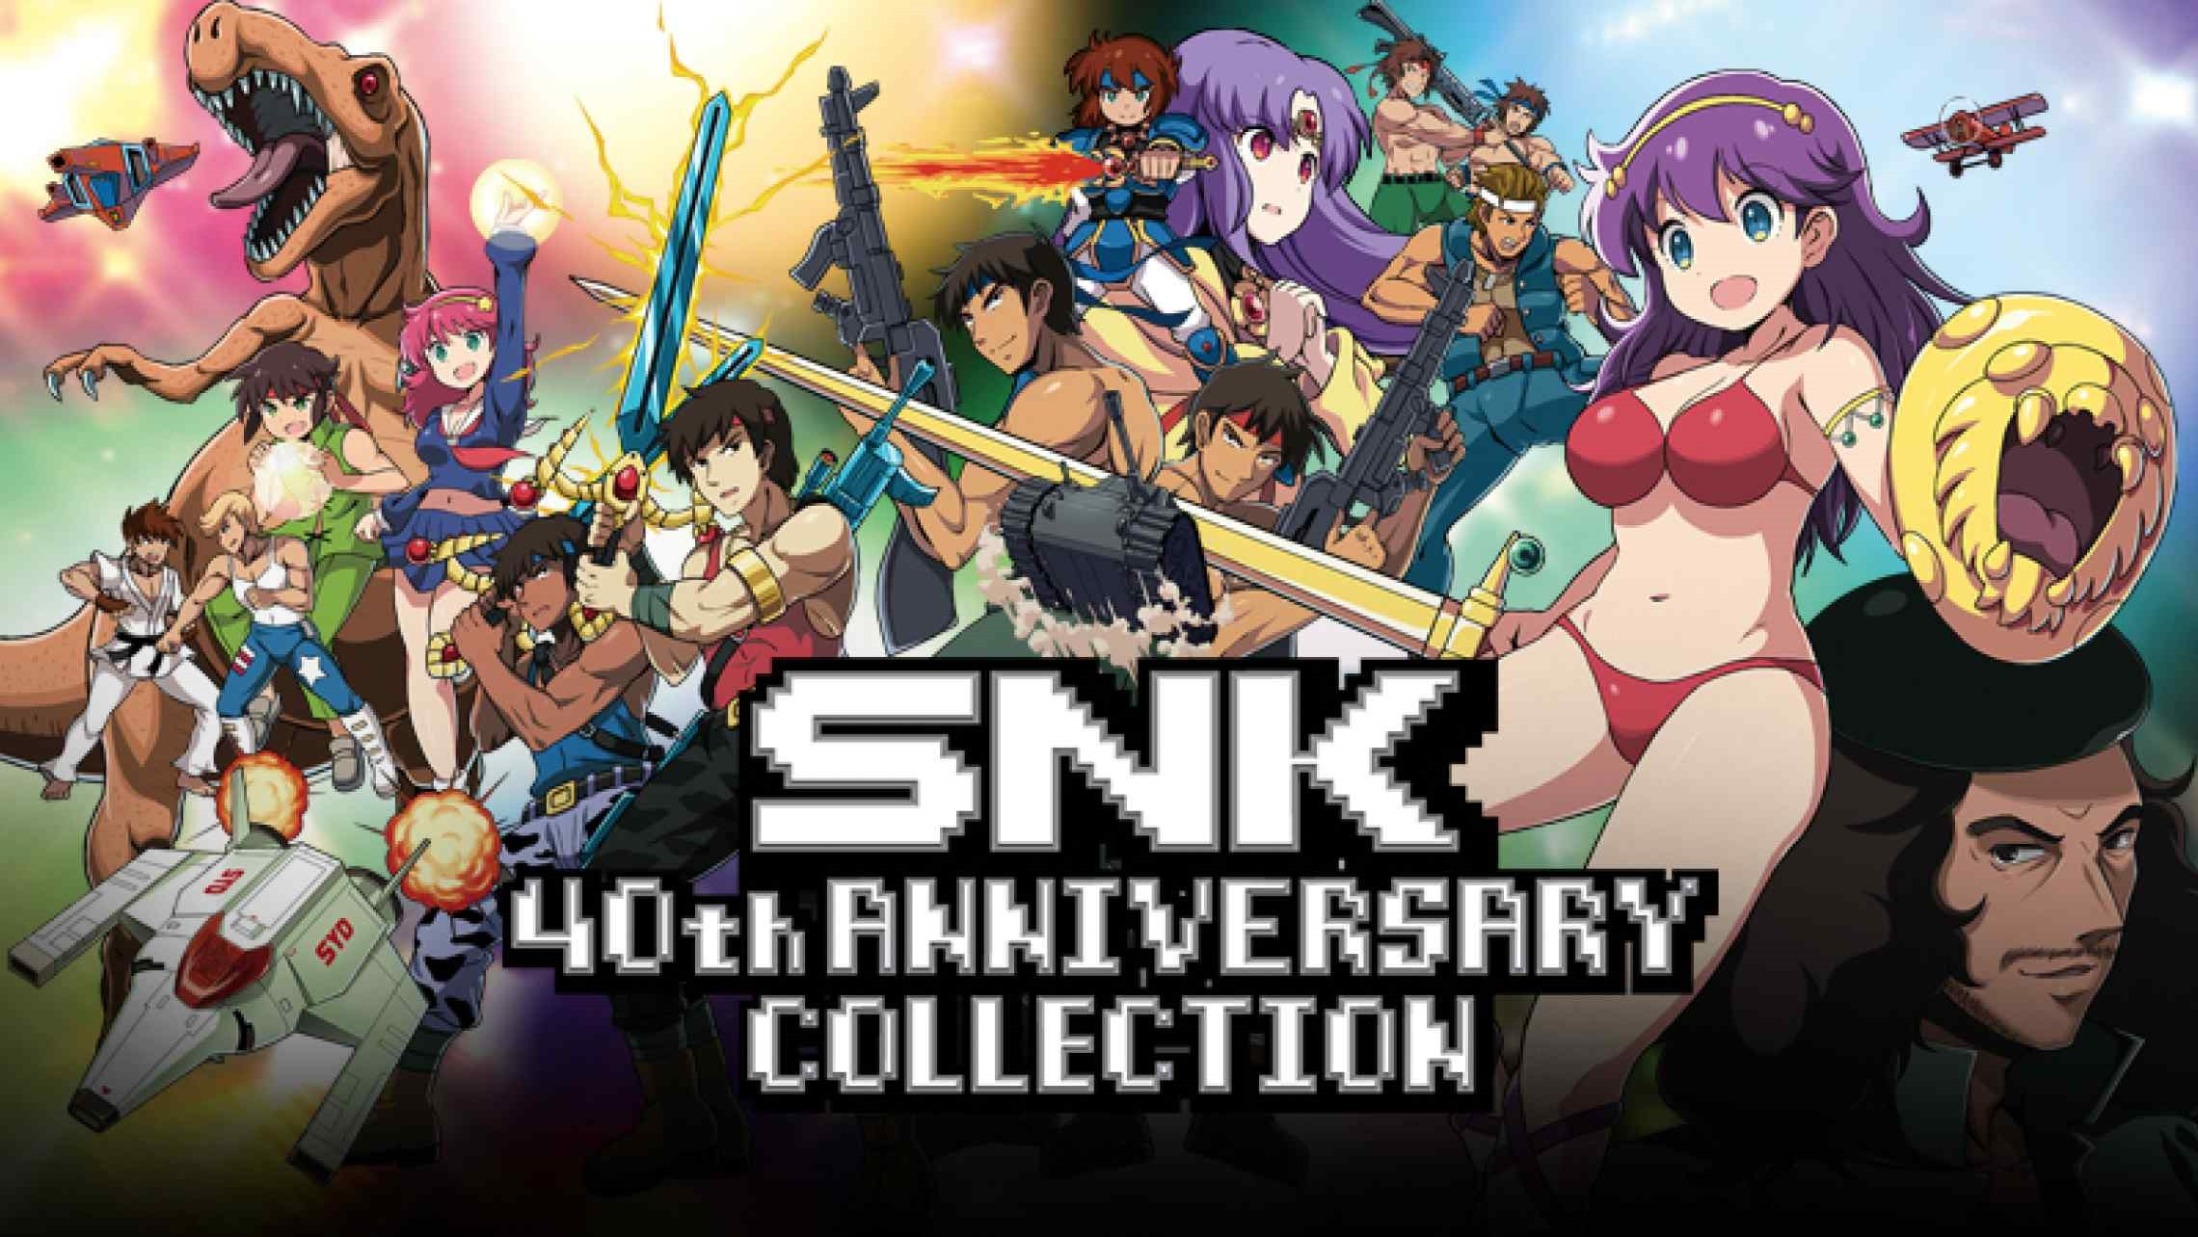 Imperial harem slg. SNK 40th Anniversary collection. Свитчи SNK. Beast Busters posters SNK. 6th Anniversary Survivor.